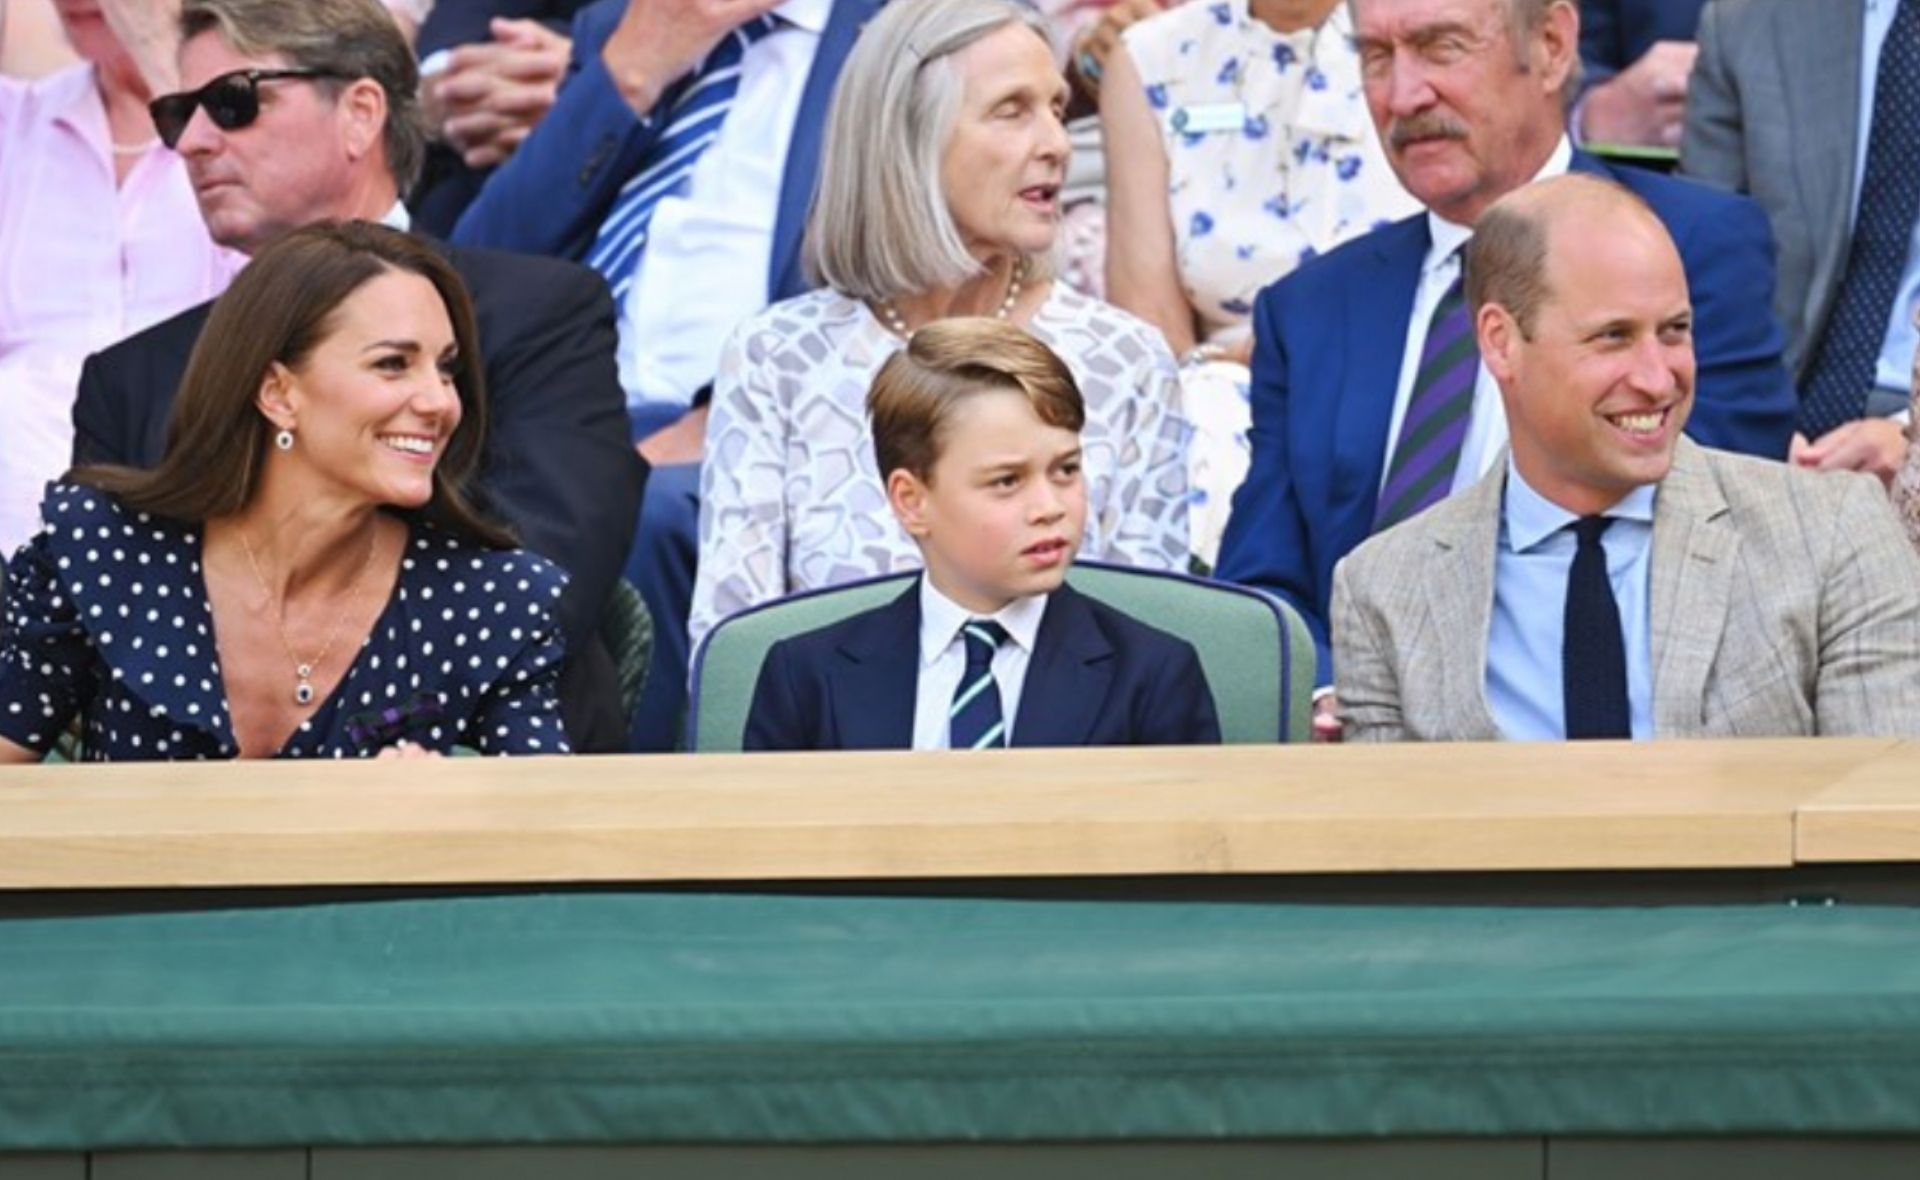 Prince George makes his Wimbledon debut and shares a precious moment with his mum, Catherine, Duchess of Cambridge